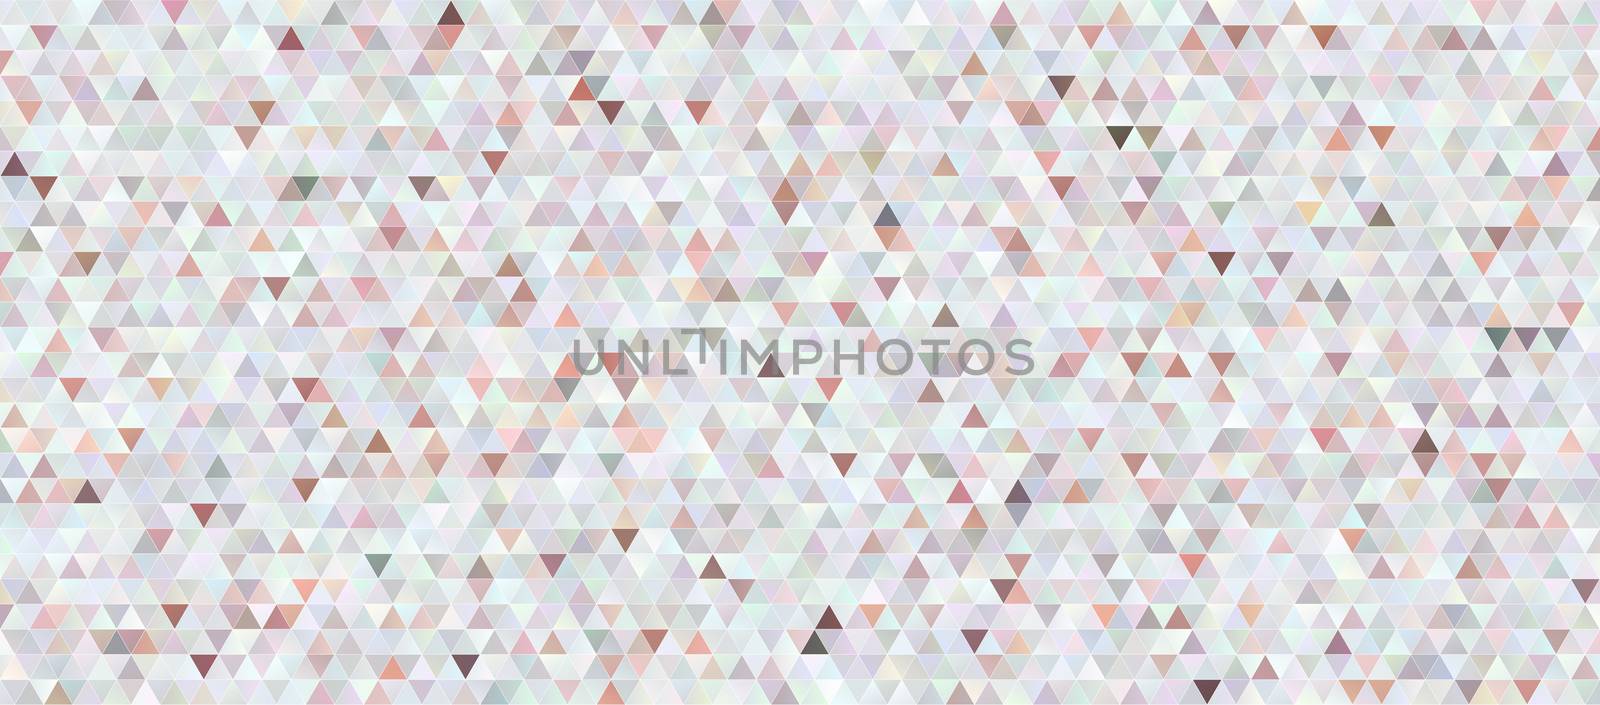 Abstract triangle background illustration by dutourdumonde